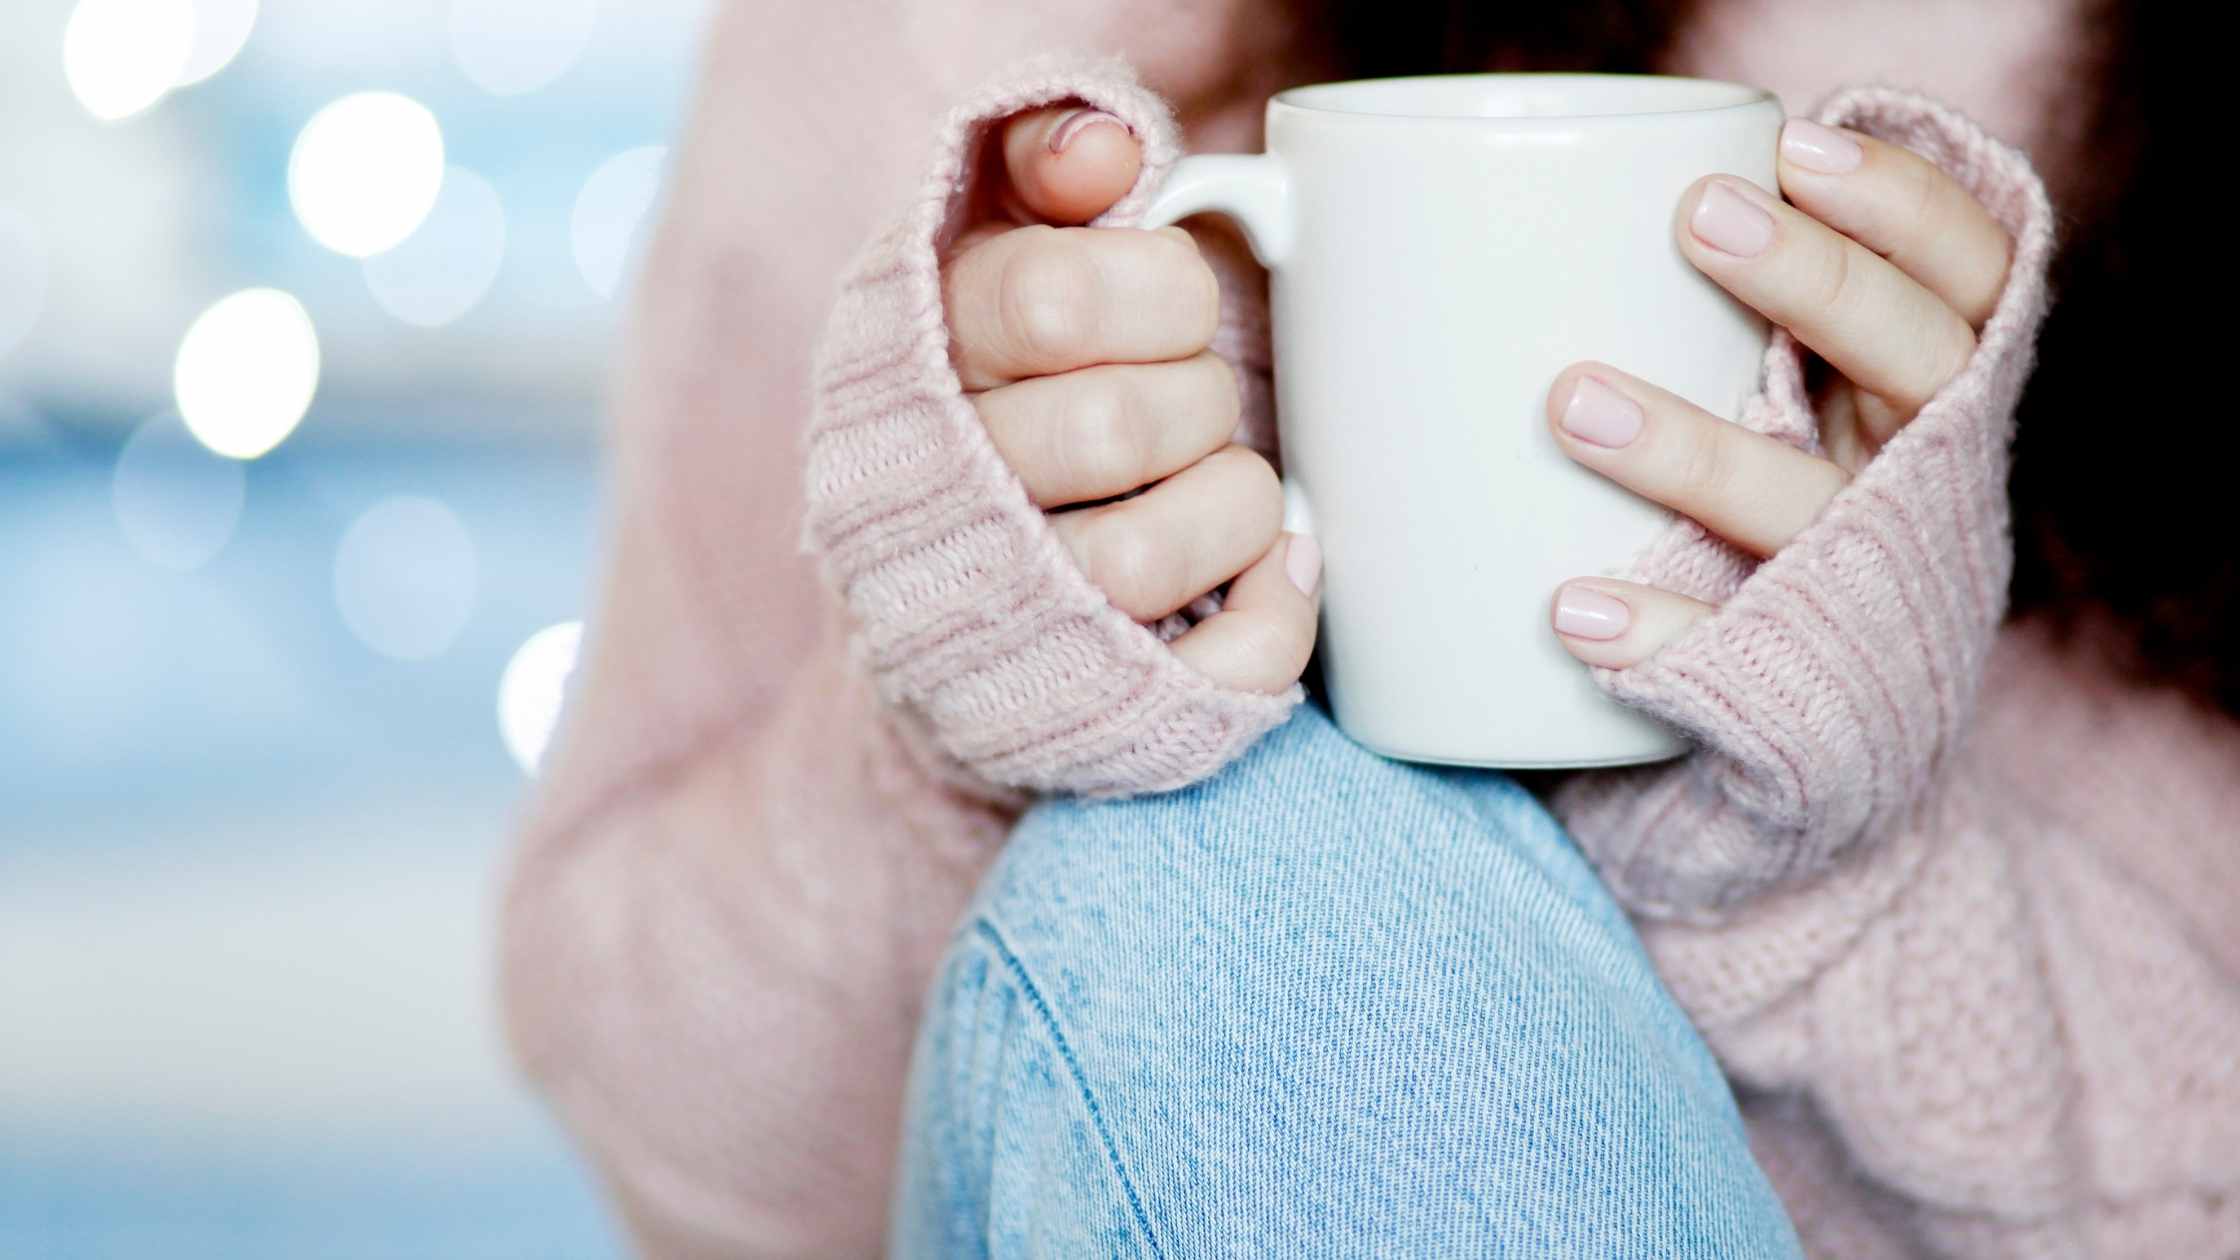 Woman sitting with a cup of coffee, just her middle body showing wearing blue jeans and pink sweater